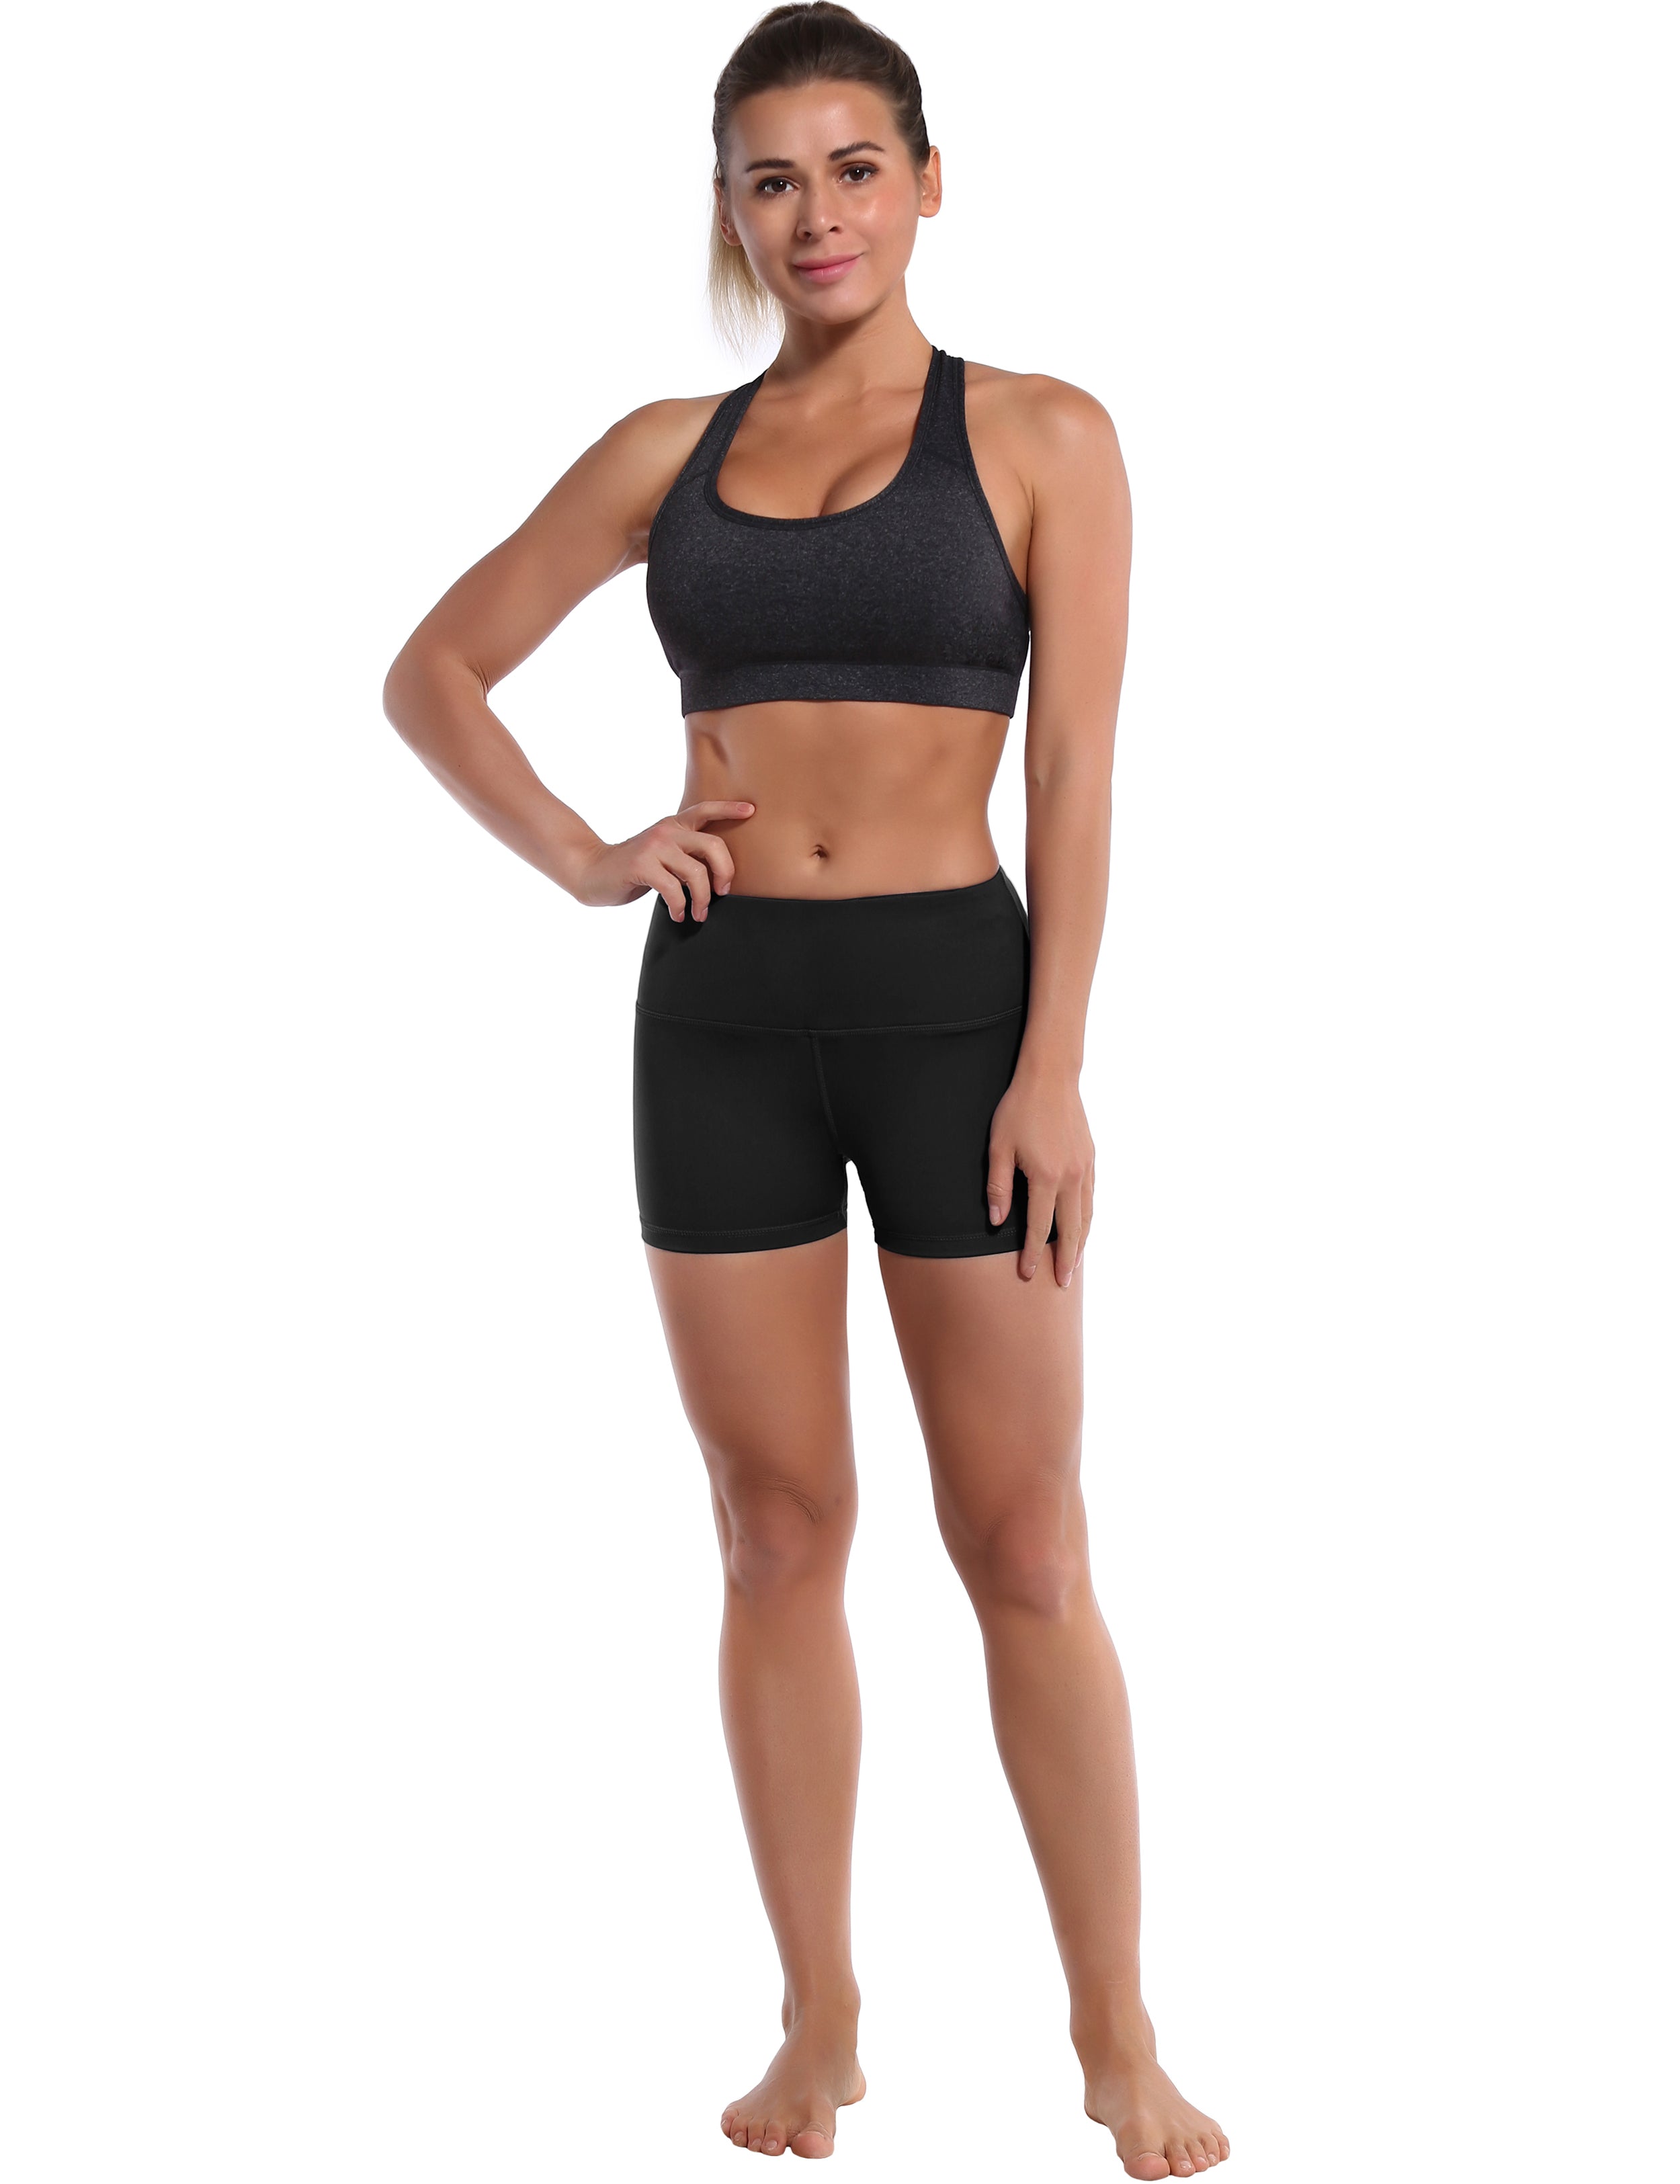 2.5" Yoga Shorts black Softest-ever fabric High elasticity High density 4-way stretch Fabric doesn't attract lint easily No see-through Moisture-wicking Machine wash 75% Nylon, 25% Spandex